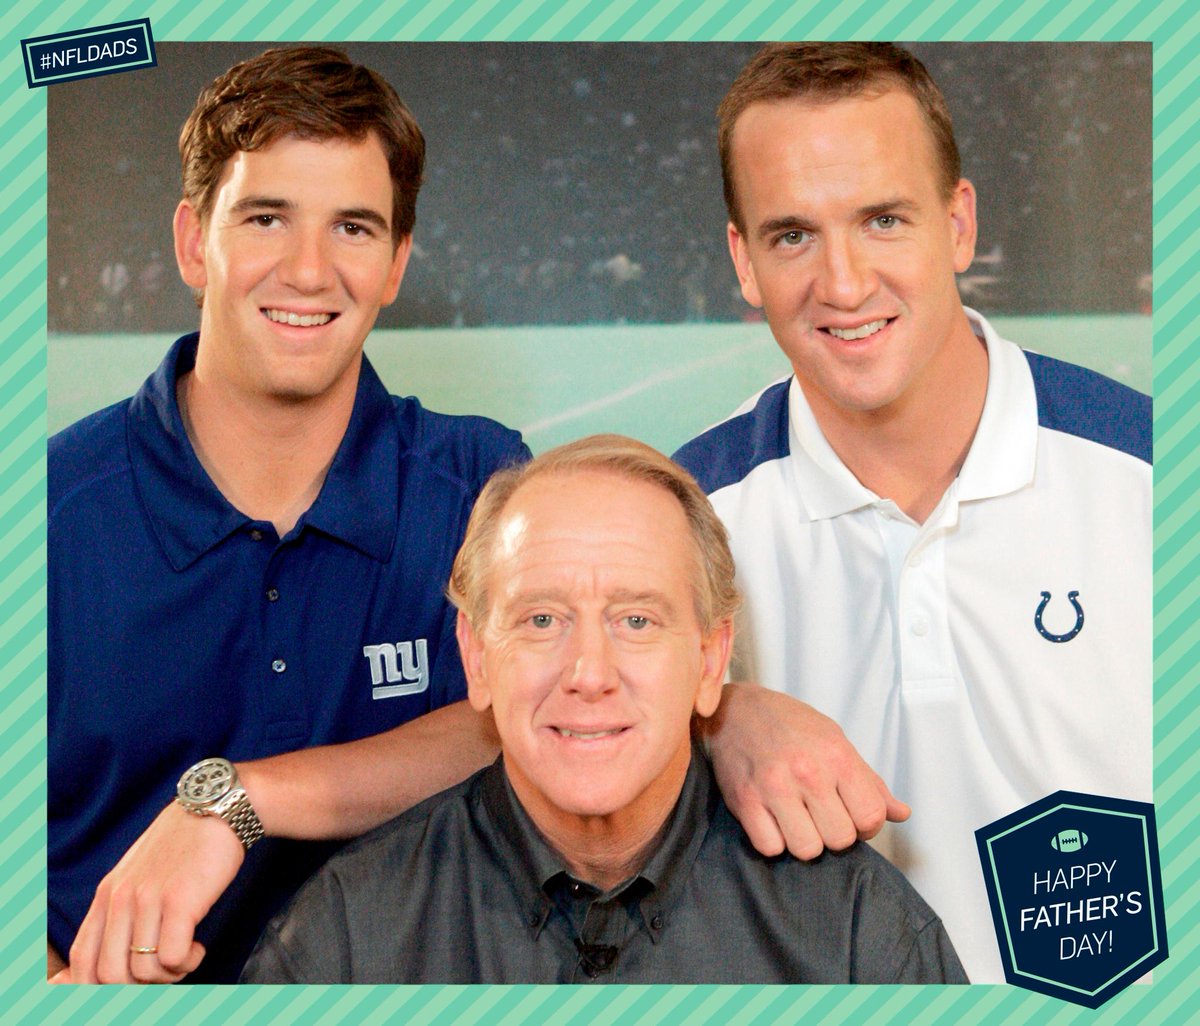 Happy #FathersDay from the Manning Boys! 

#NFLDads